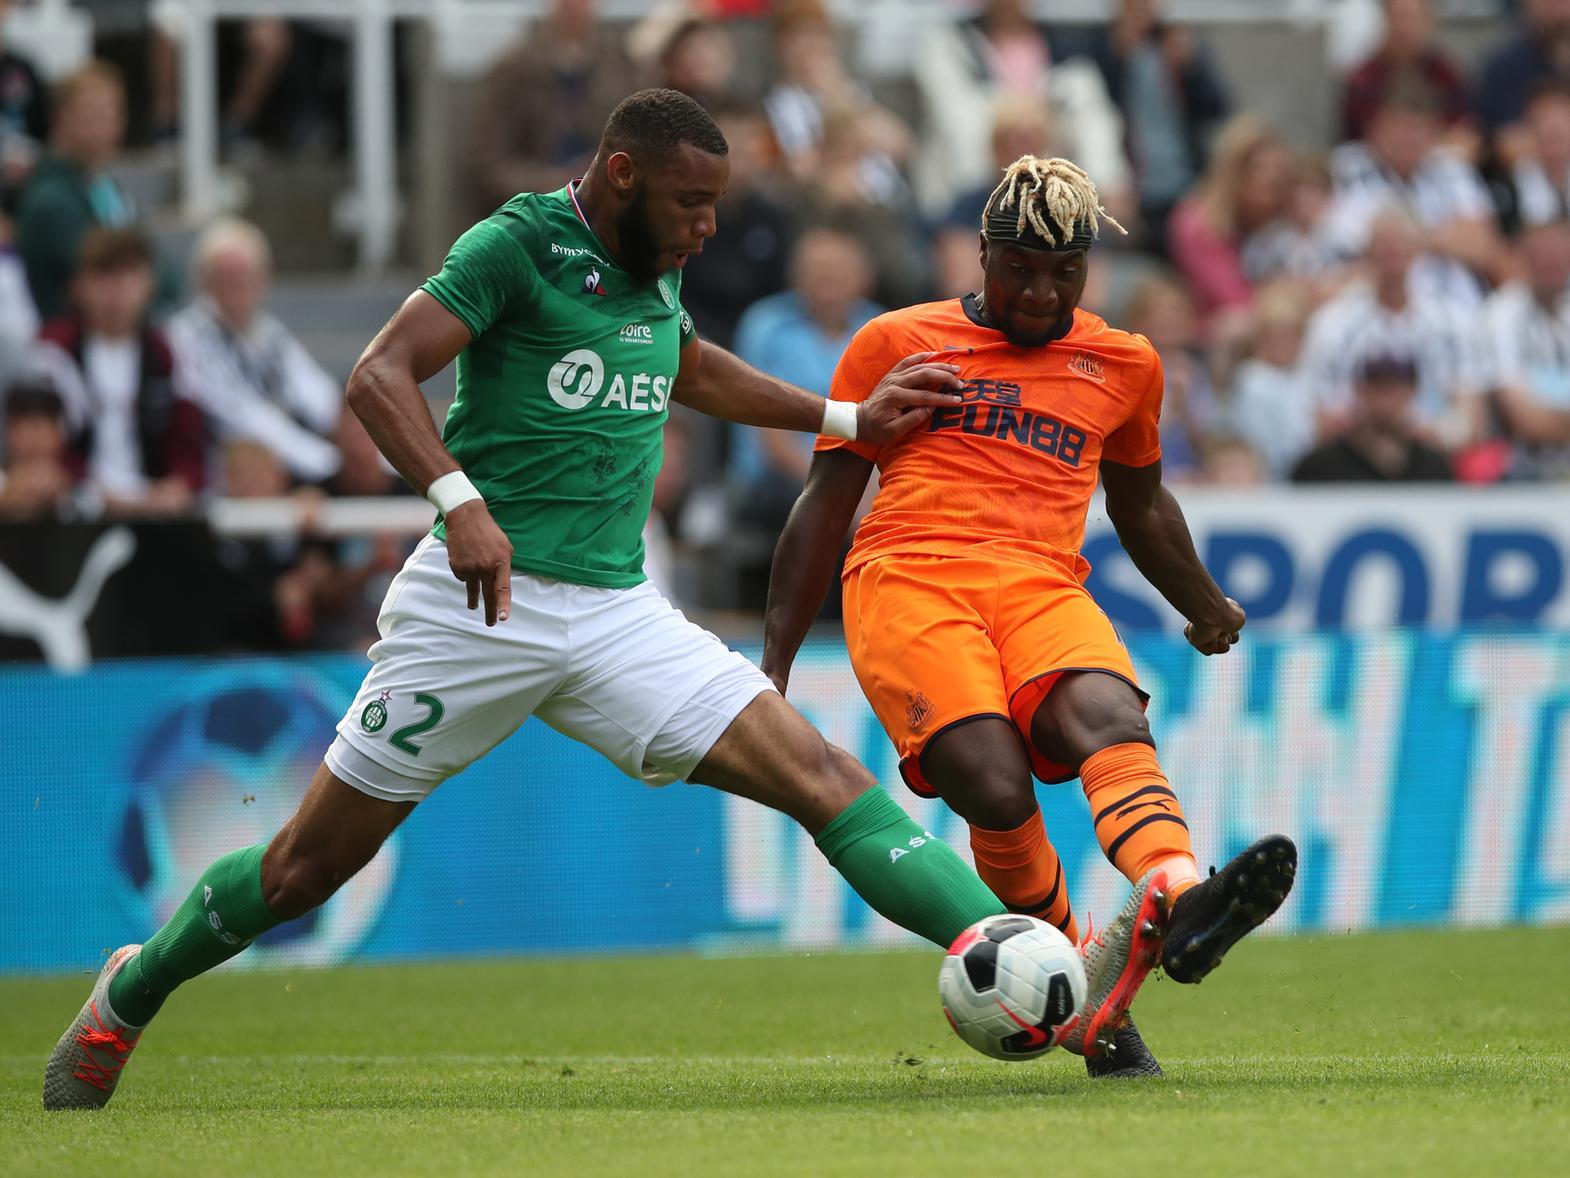 Transfer activity is rarely frenzied at Turf Moor. If they get anyone, it'll be a defender to shore up that leaky defence. They're among a host of clubs to be linked with St Etienne's Harold Moukoudi.